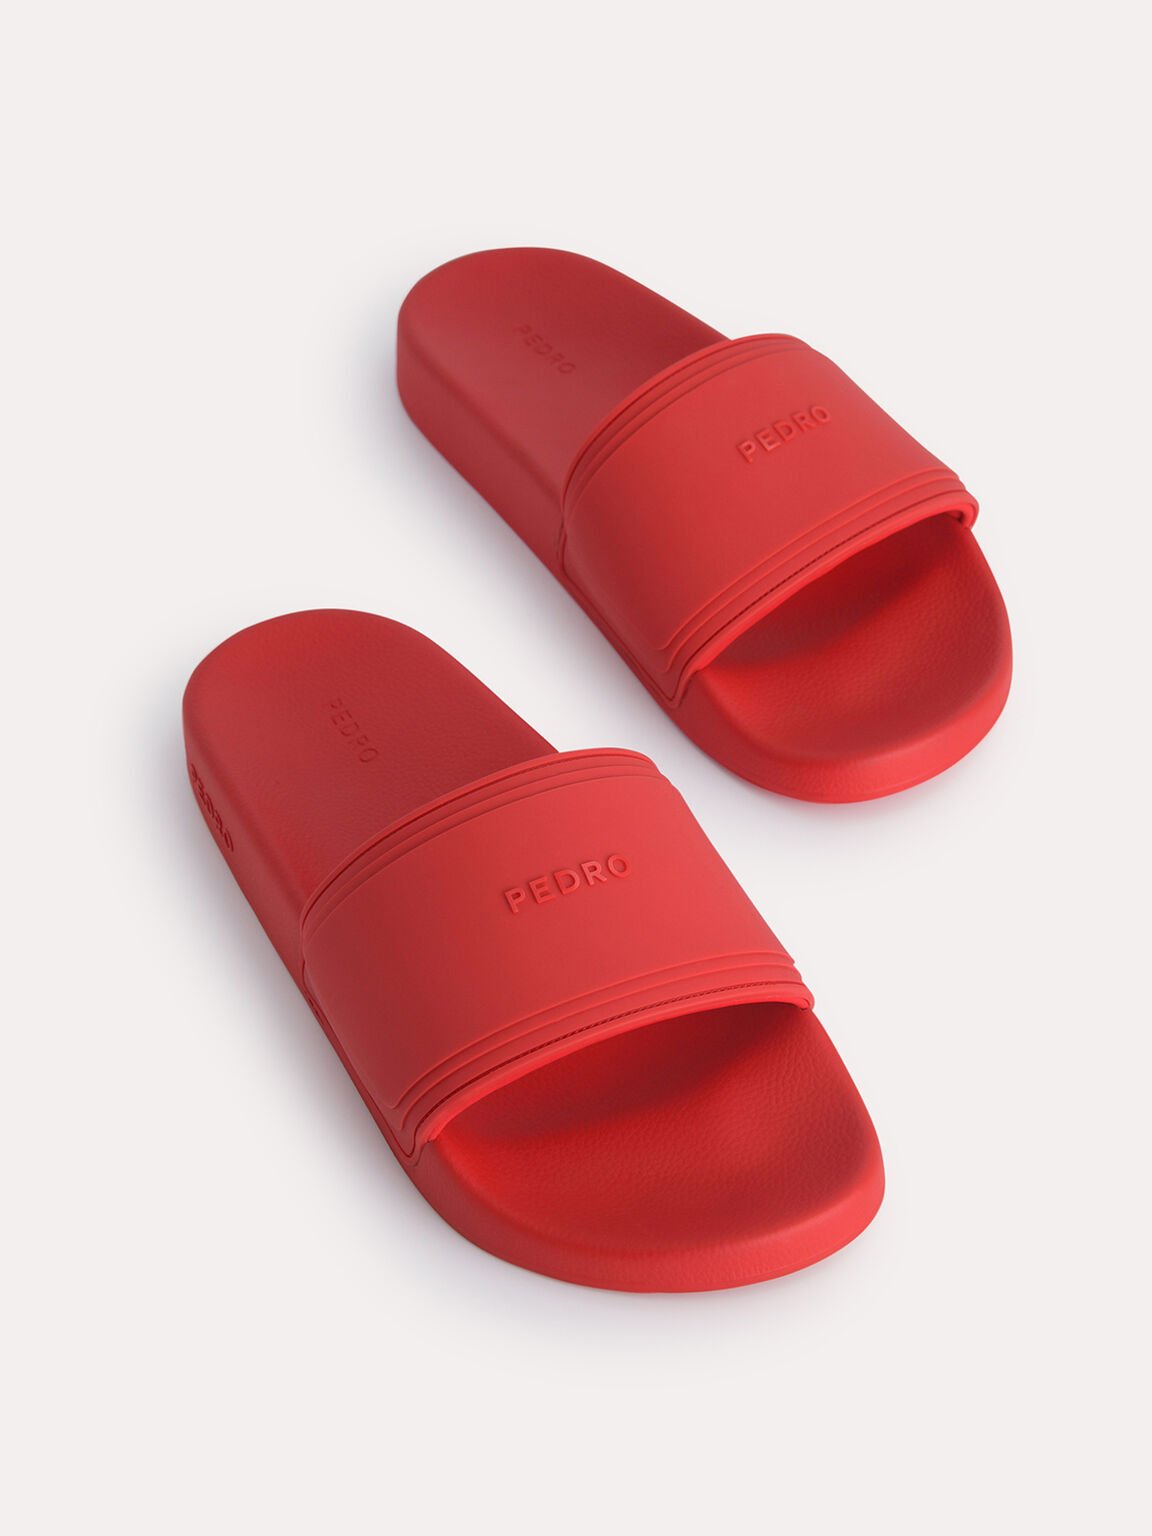 Casual Slides, Red